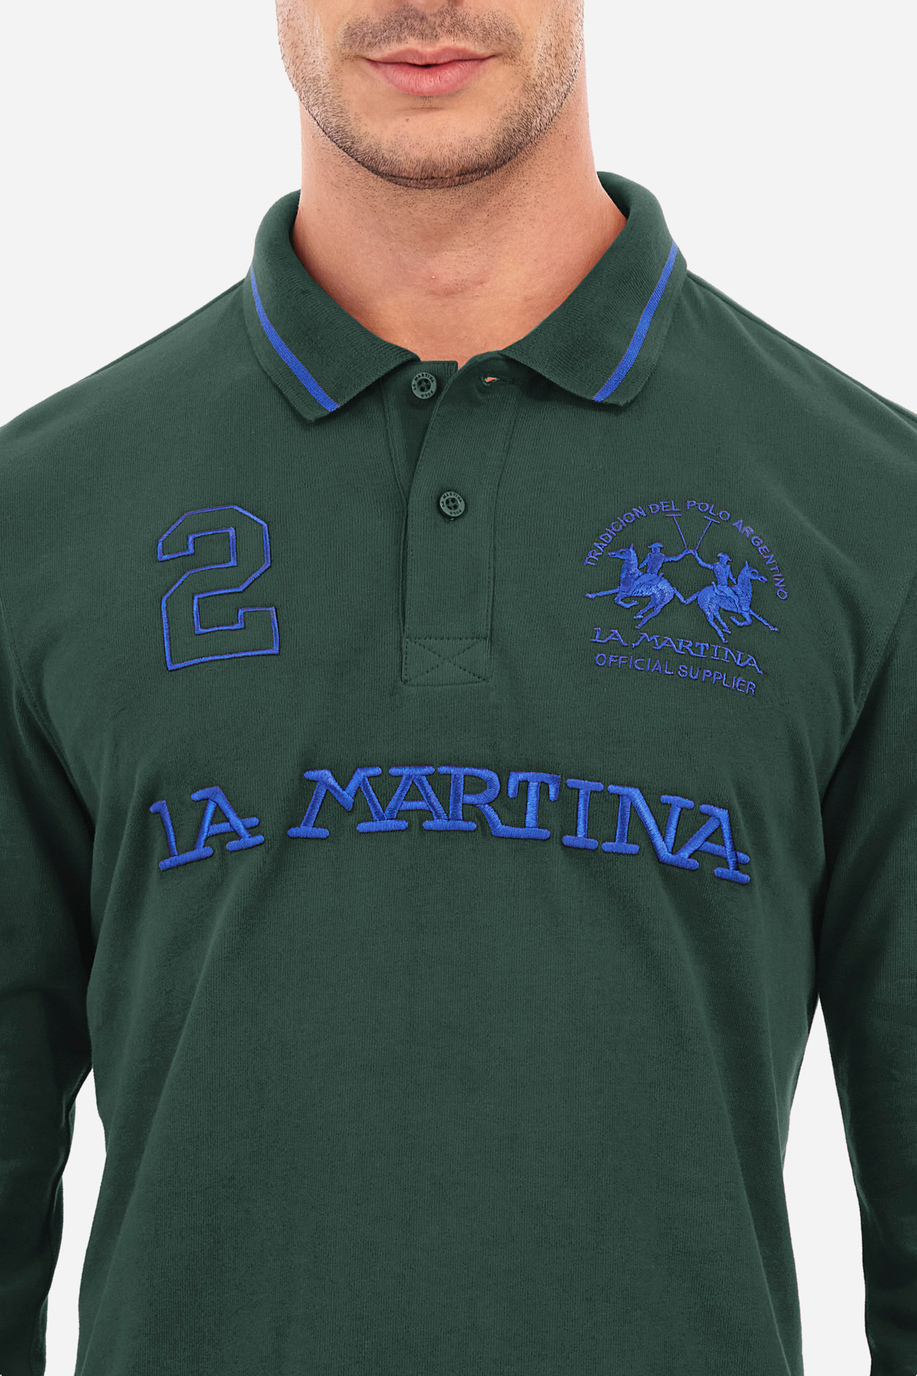 Man polo shirt in regular fit - Urbe - Polo Shirts | La Martina - Official Online Shop